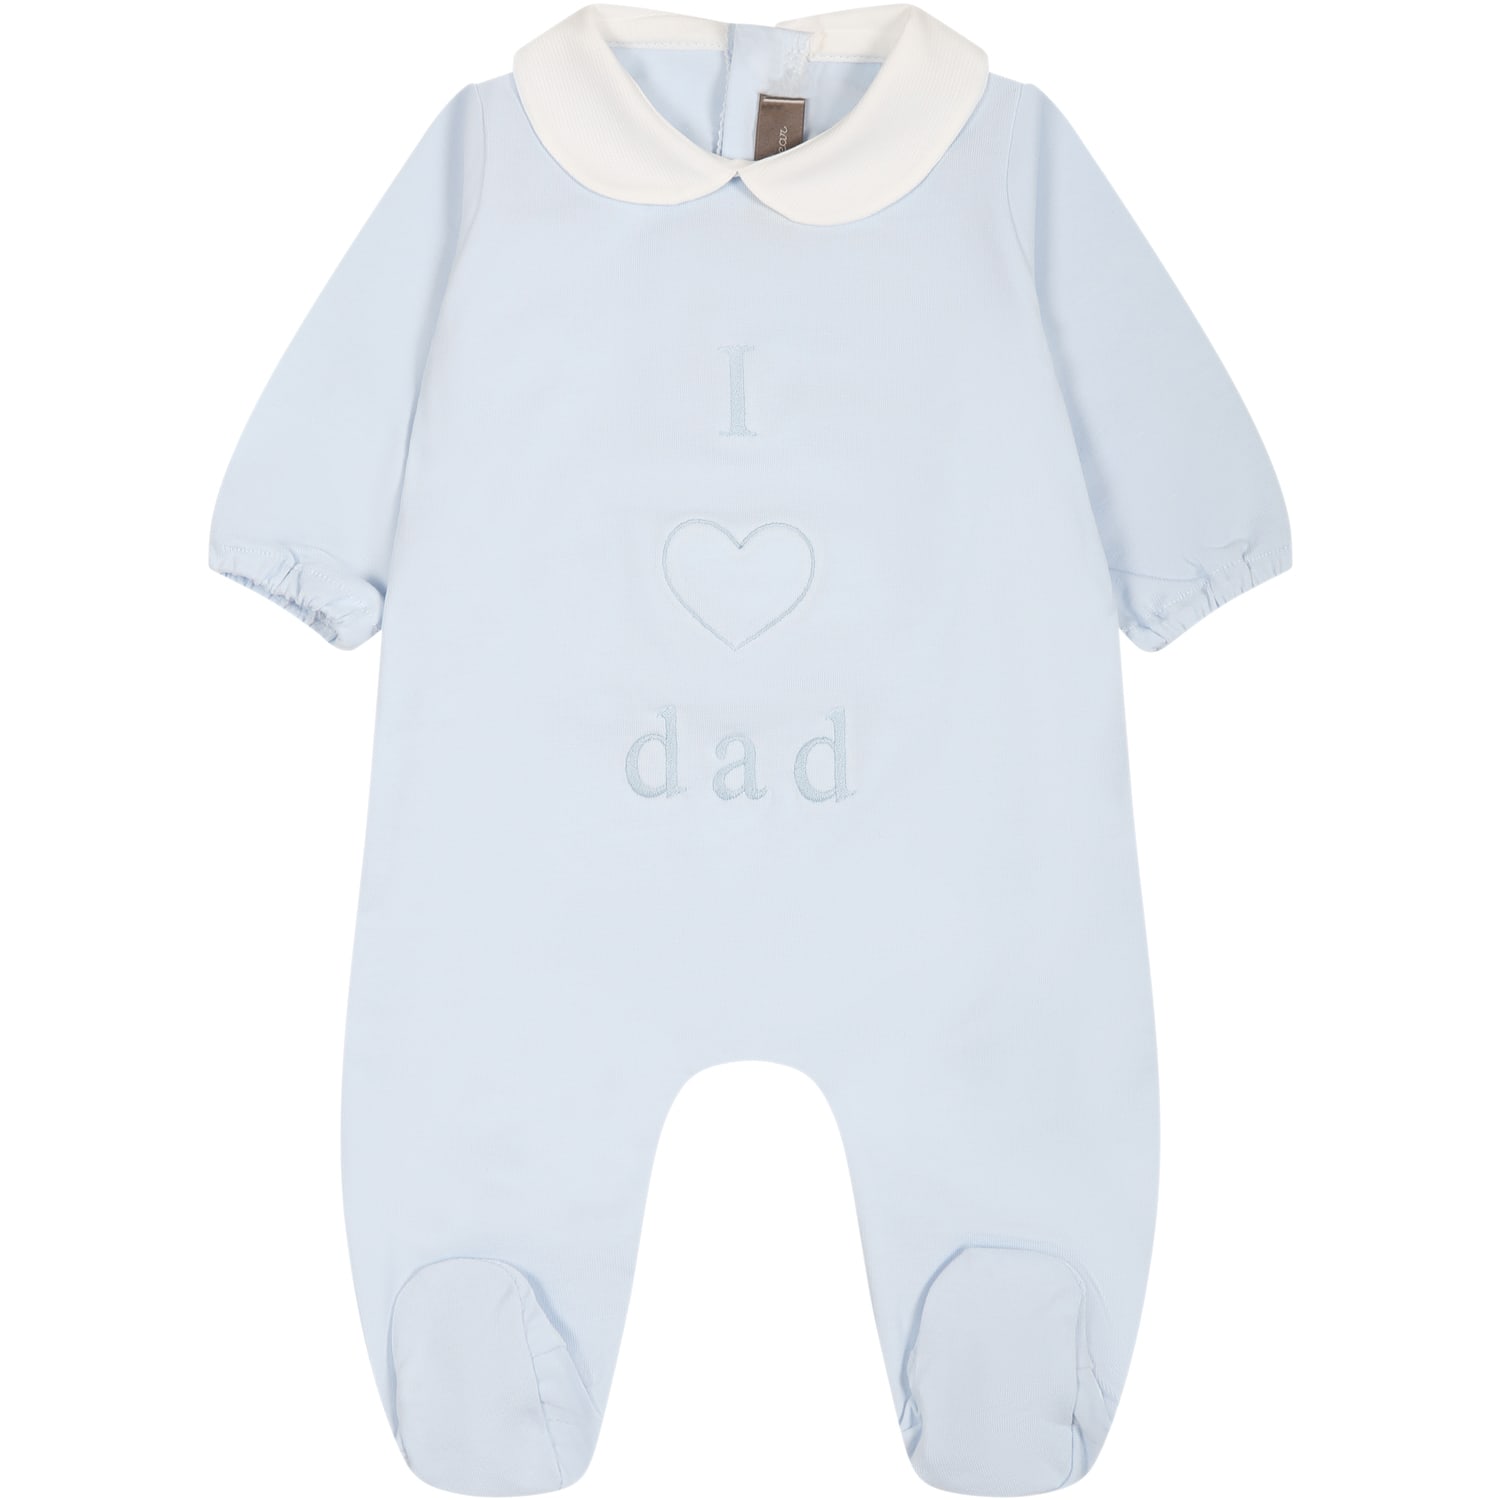 Little Bear Light Blue Onesie For Baby Boy With Writing And Heart In Cielo